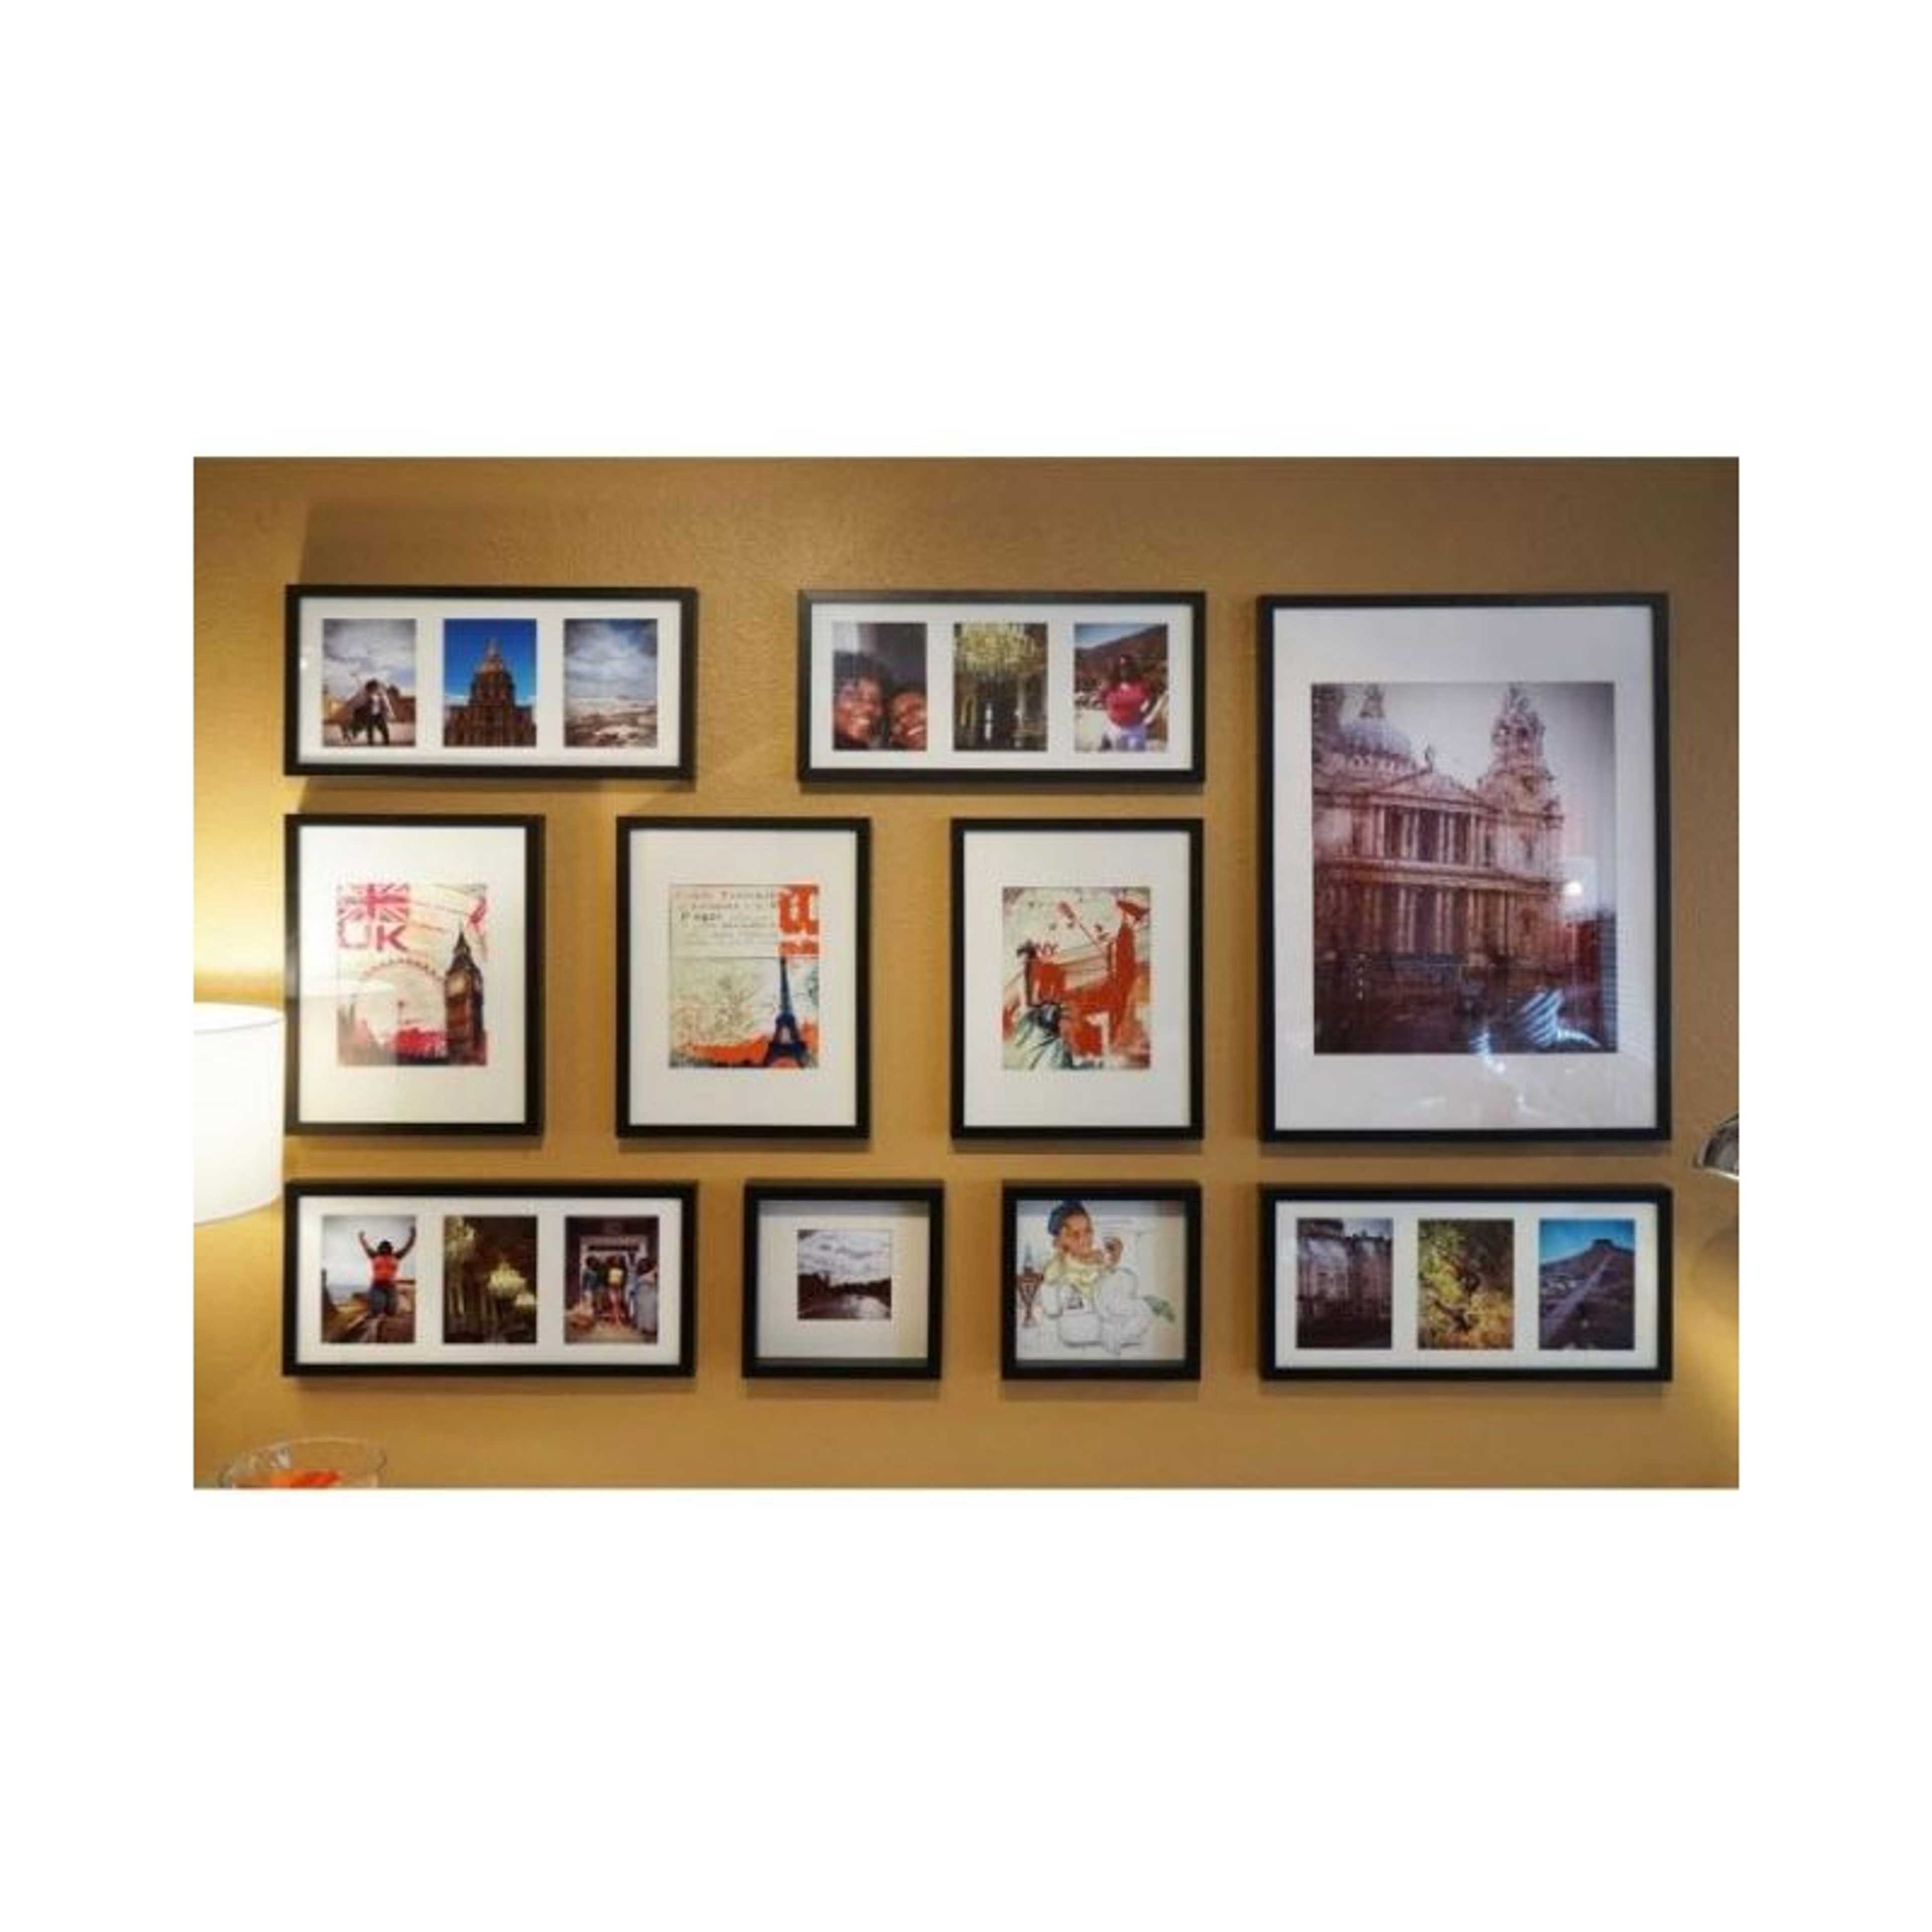 Pack of 10 - Antique Look Photo Frames Collage Wall Hanging Wall Decor Set